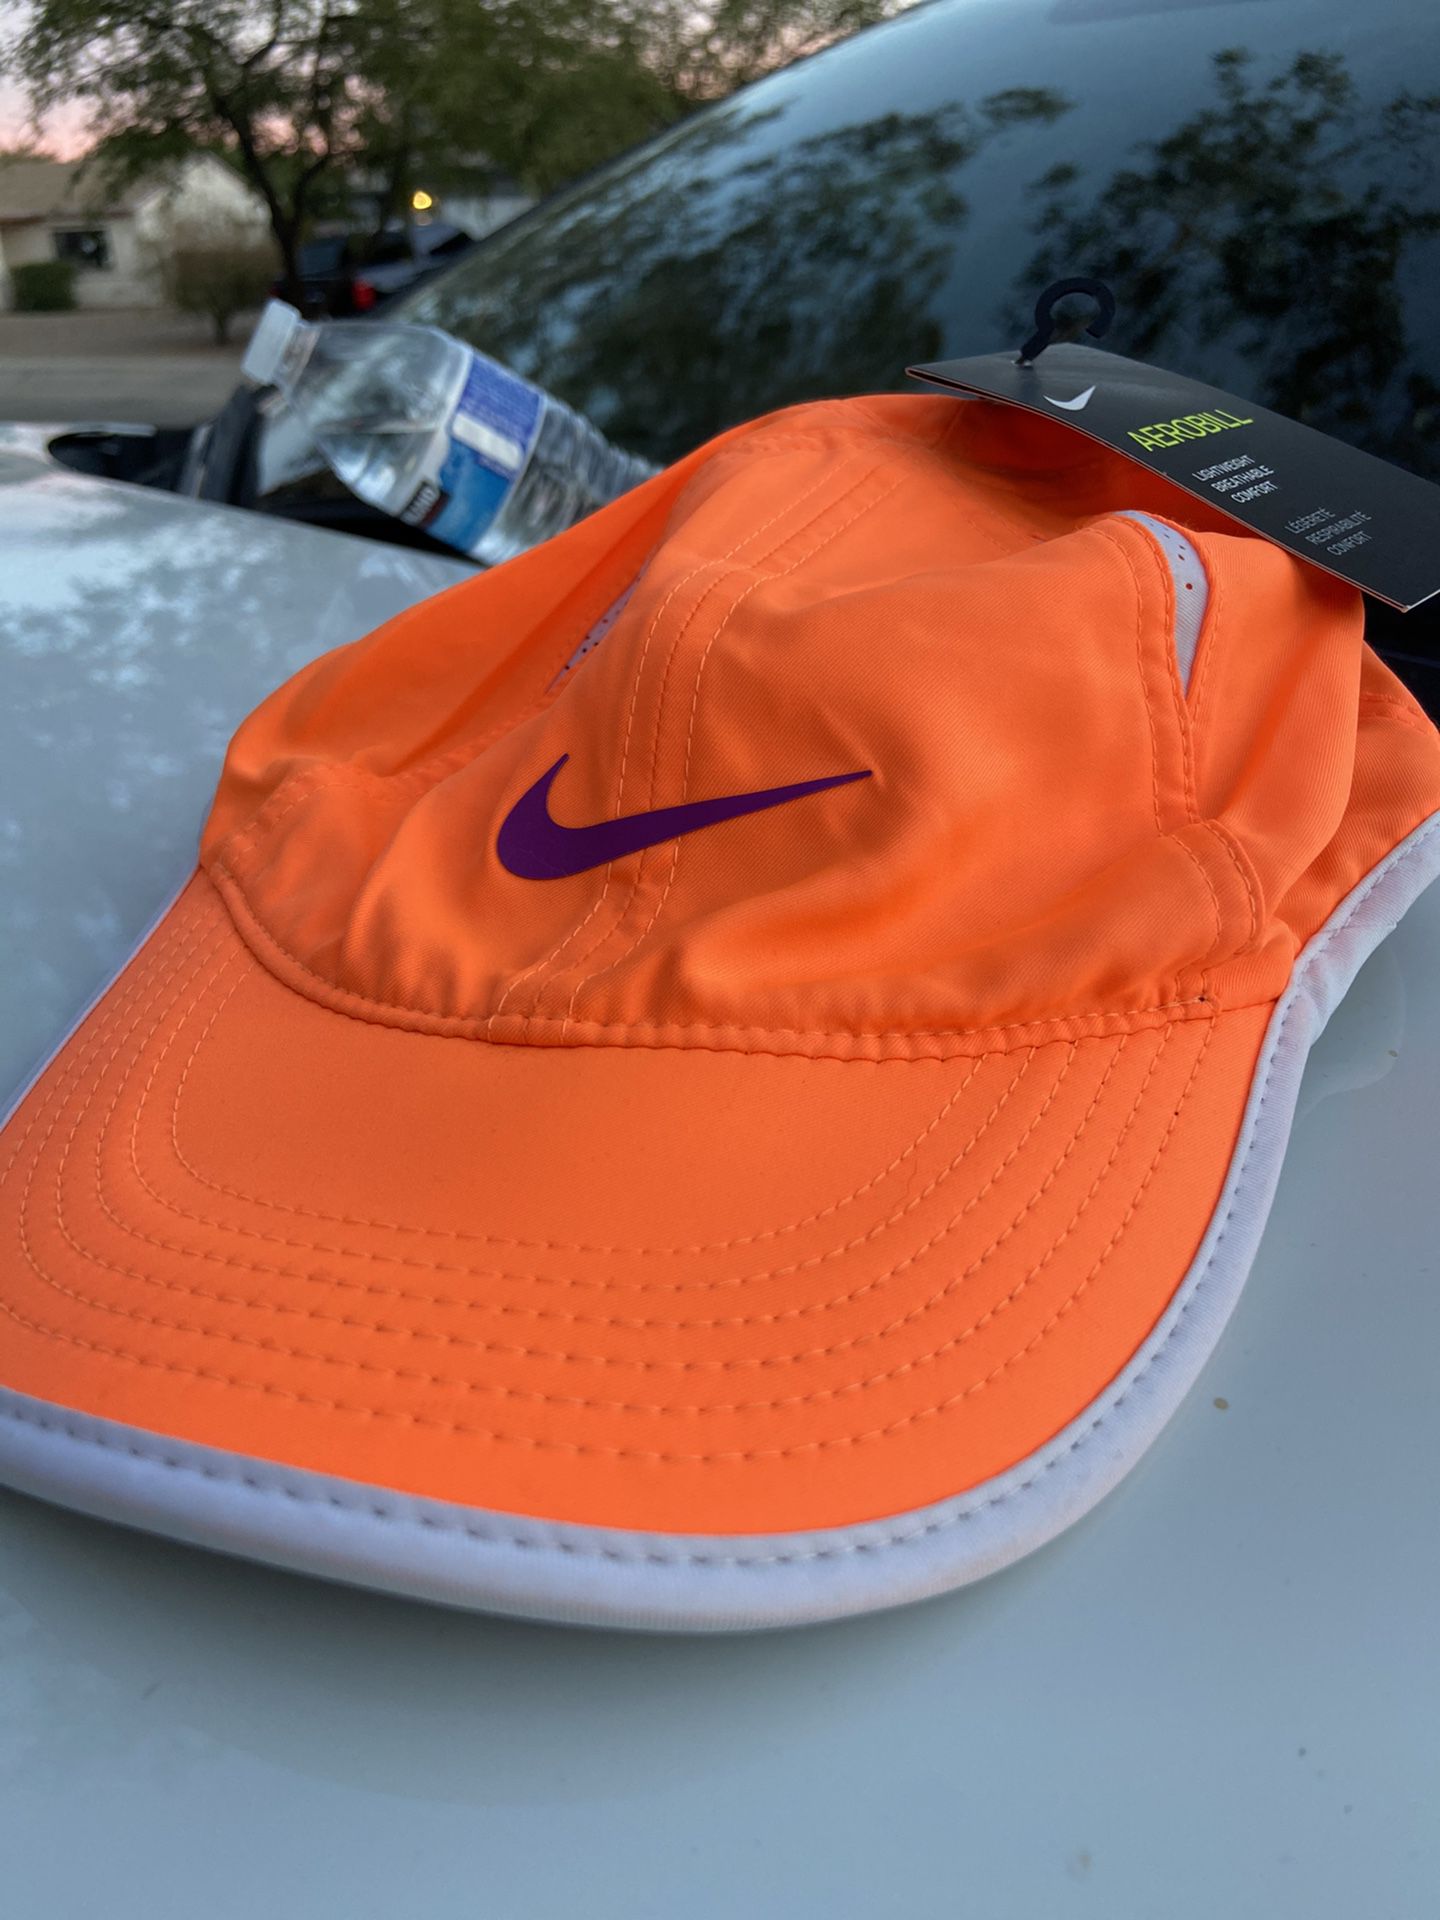 Nike Cycling Cap for Sale in Tucson, AZ - OfferUp